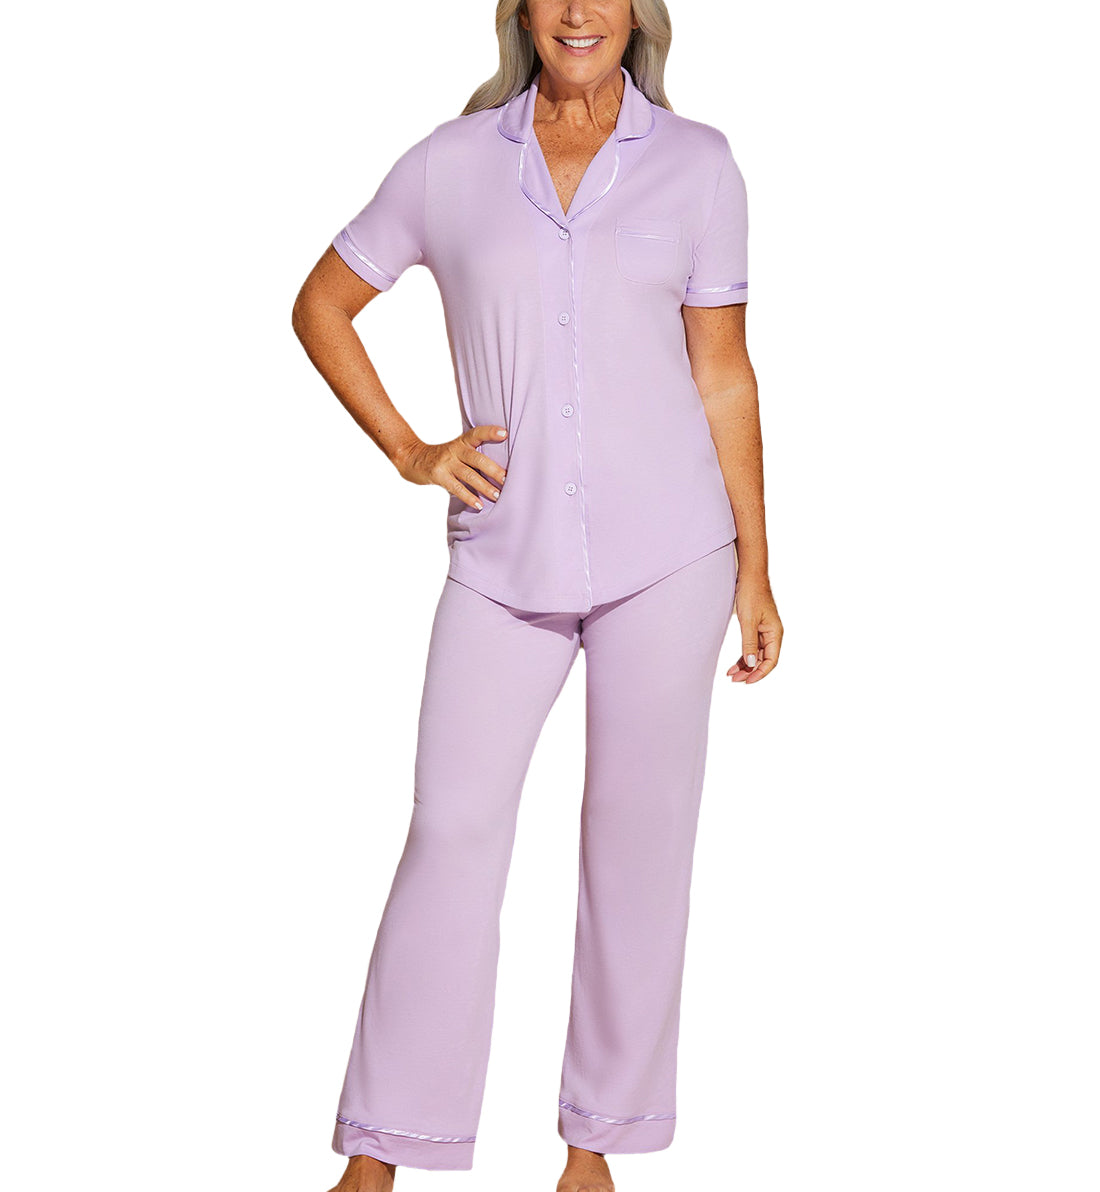 Cosabella Amore Bella Short Sleeve Top & Pant PJ Set (AMORE9645),Small,Icy Violet - Icy Violet,Small